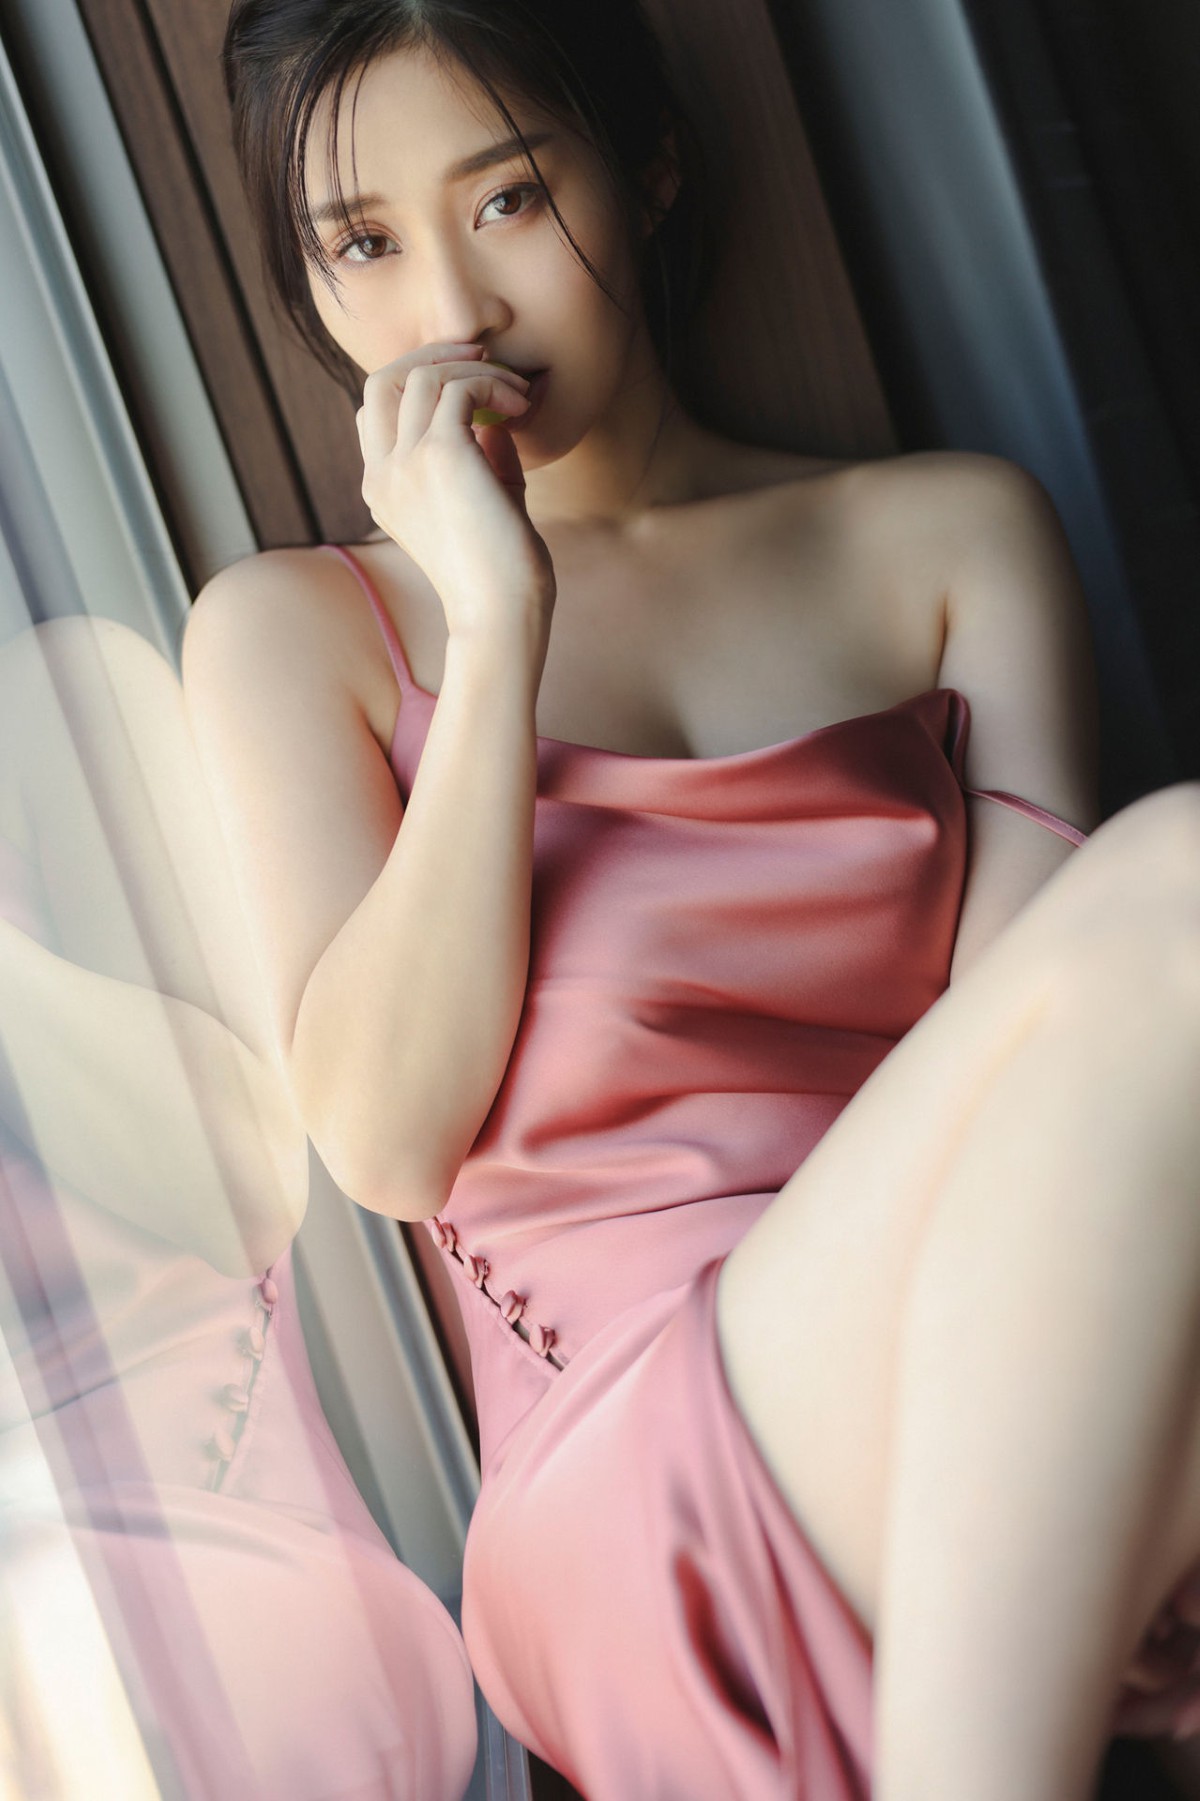 FRIDAY Digital Photobook 2023 02 10 Rin Takahashi 高橋凛 In A Suite Room With An I Cup Beauty Vol 1 0006 2490546009.jpg